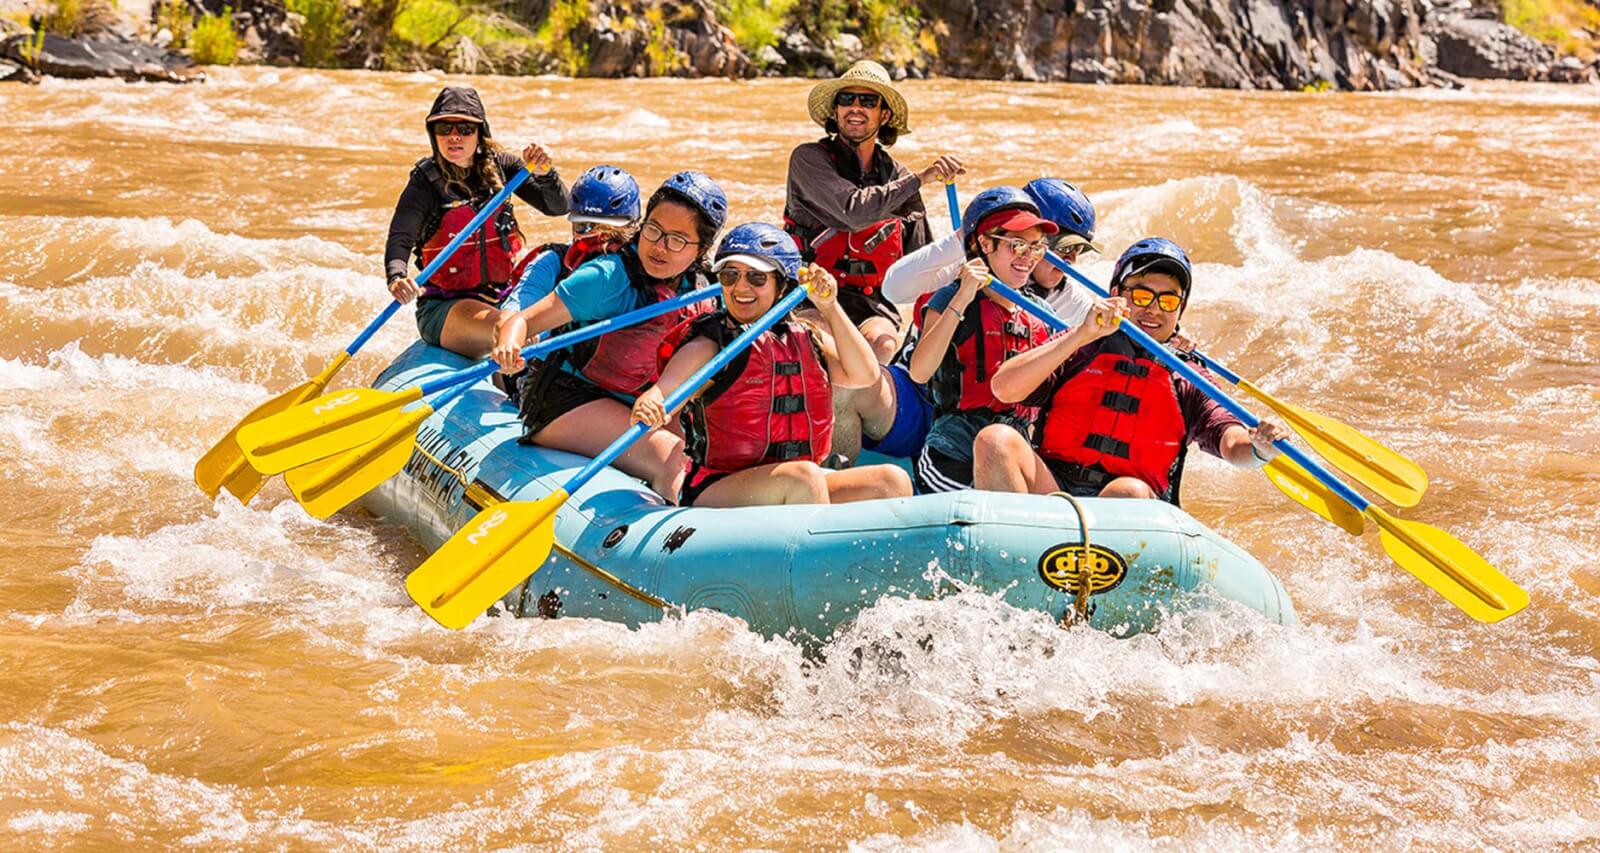 People whitewater rafting on the Colorado River